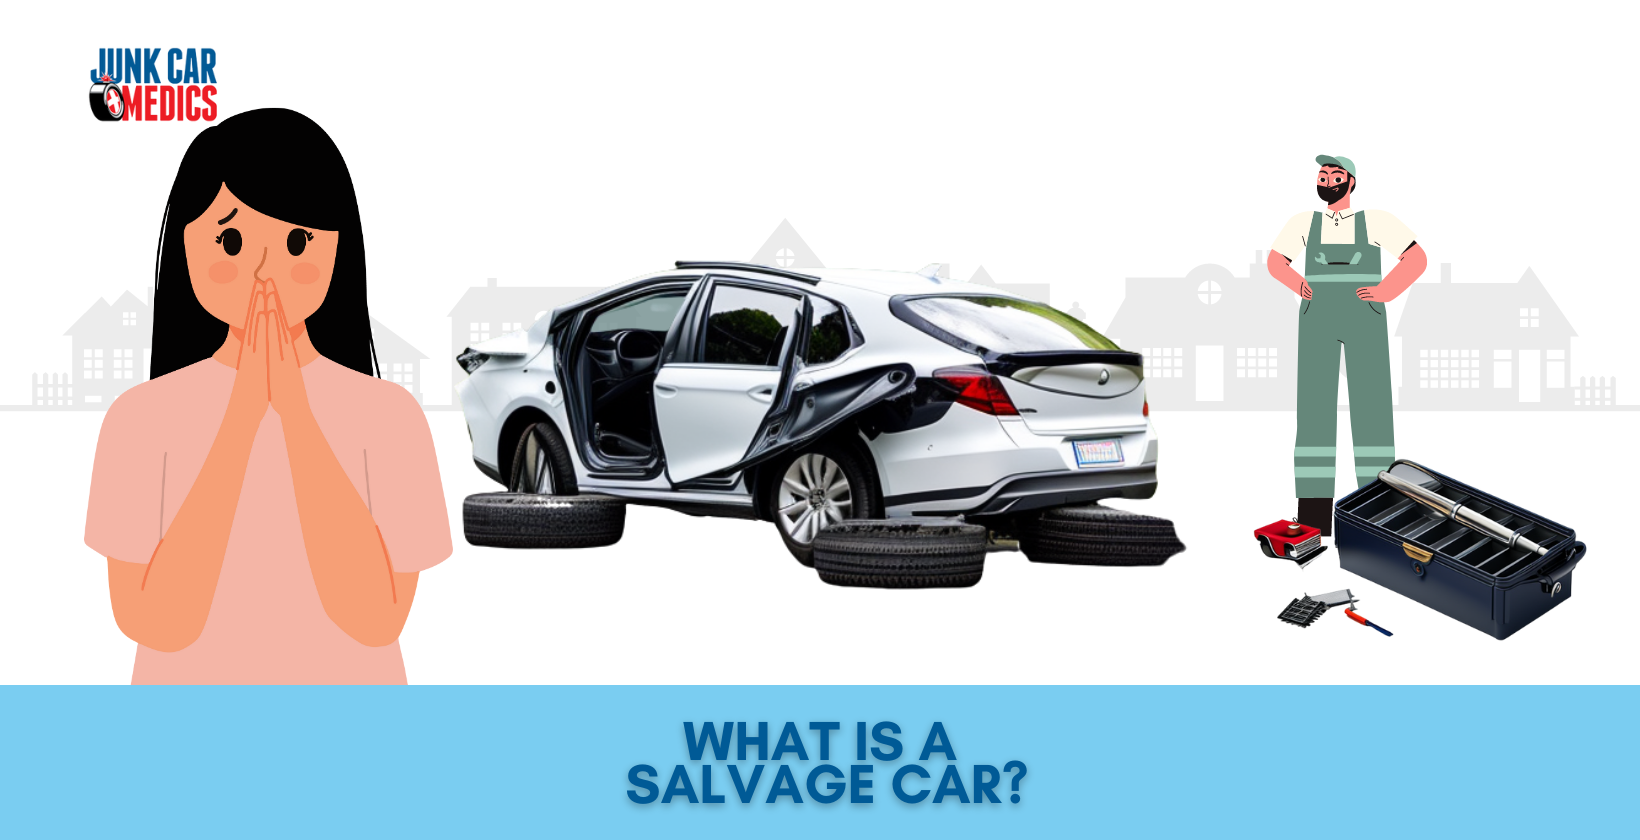 What is a Salvage Car?